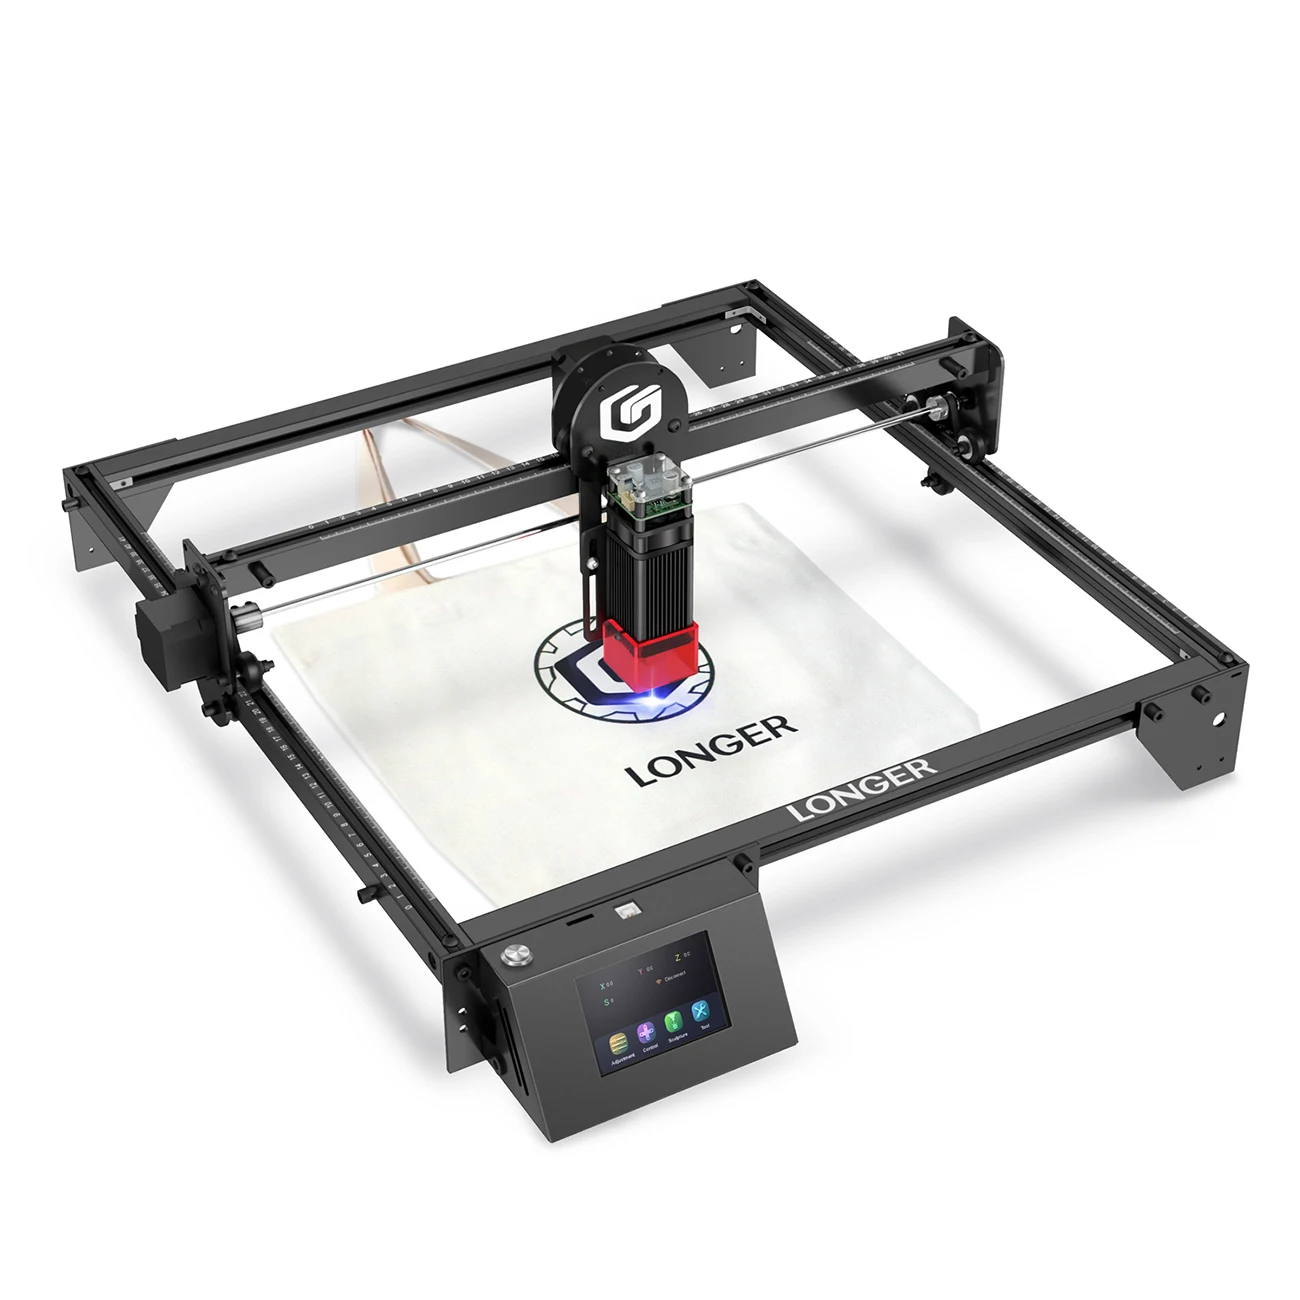 LONGER RAY 5 Laser Engraver 5W / 10W /20W WIFI Connection 3.5 Touch Screen 32-Bit Chipset Eye Protection Carving Area